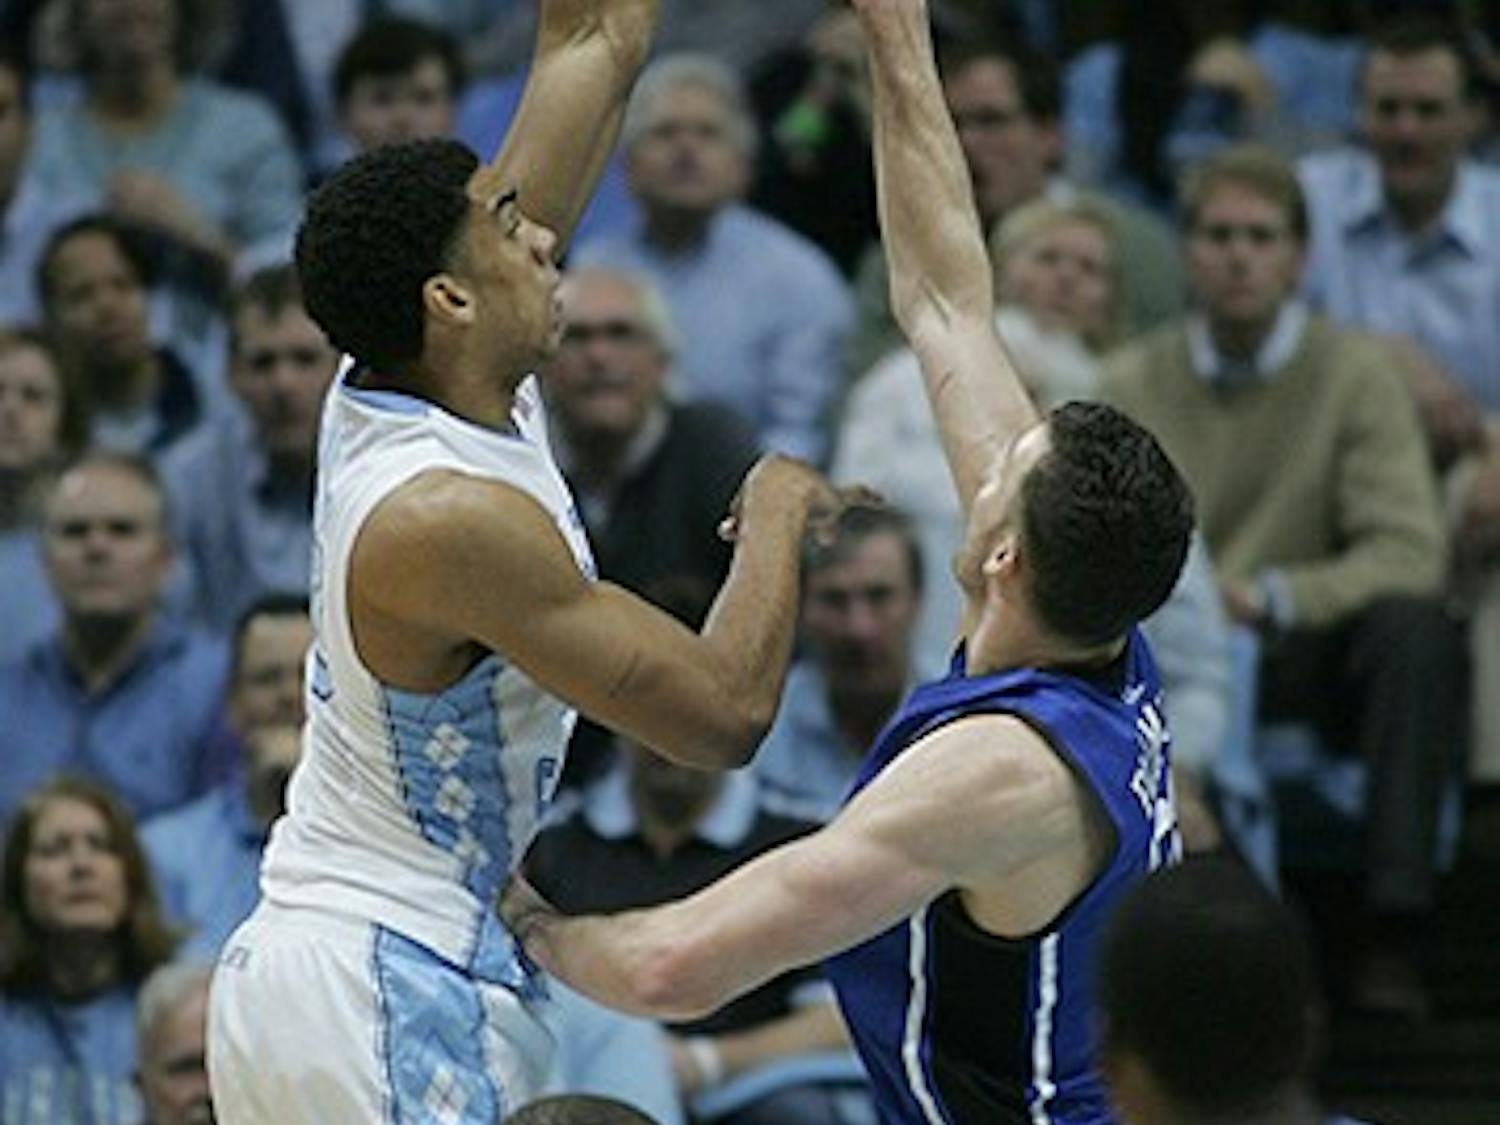 The North Carolina Tar Heels lead the Duke Blue Devils 43-40 at the half during the game at the Dean E. Smith Center on Wednesday, Feb. 8, 2012. 